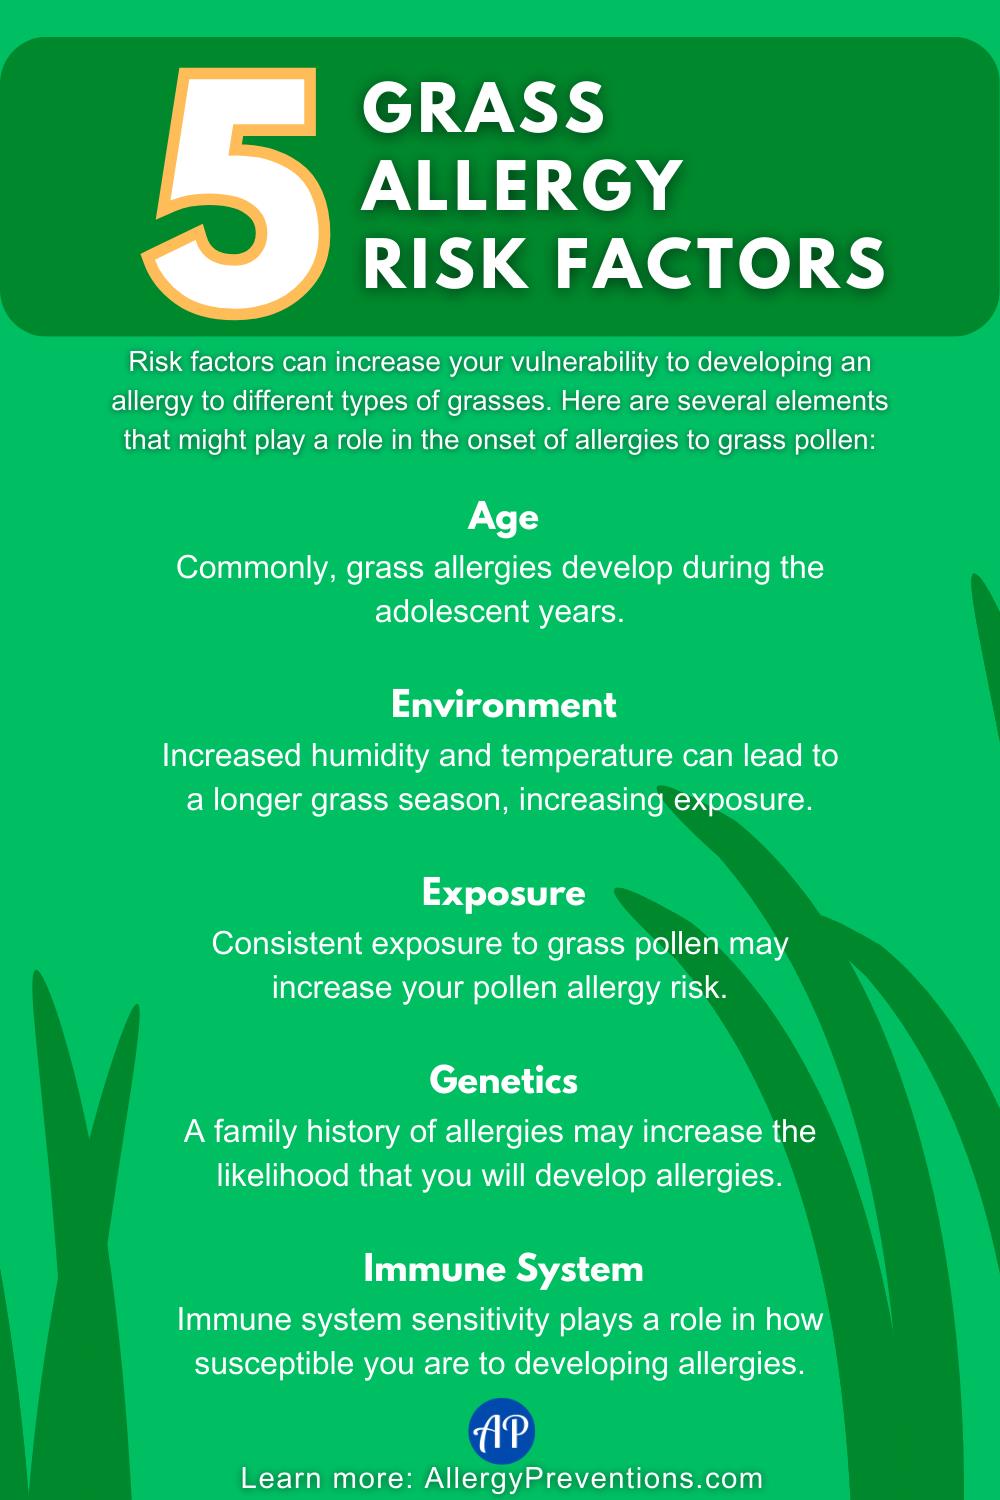 Grass allergy risk factors infographic. Risk factors can increase your vulnerability to developing an allergy to different types of grasses. Here are several elements that might play a role in the onset of allergies to grass pollen: Age: Commonly, grass allergies develop during the adolescent years. Environment: Increased humidity and temperature can lead to a longer grass season, increasing exposure. Exposure: Consistent exposure to grass pollen may increase your pollen allergy risk. Genetics: A family history of allergies may increase the likelihood that you will develop allergies. Immune System: Immune system sensitivity plays a role in how susceptible you are to developing allergies.